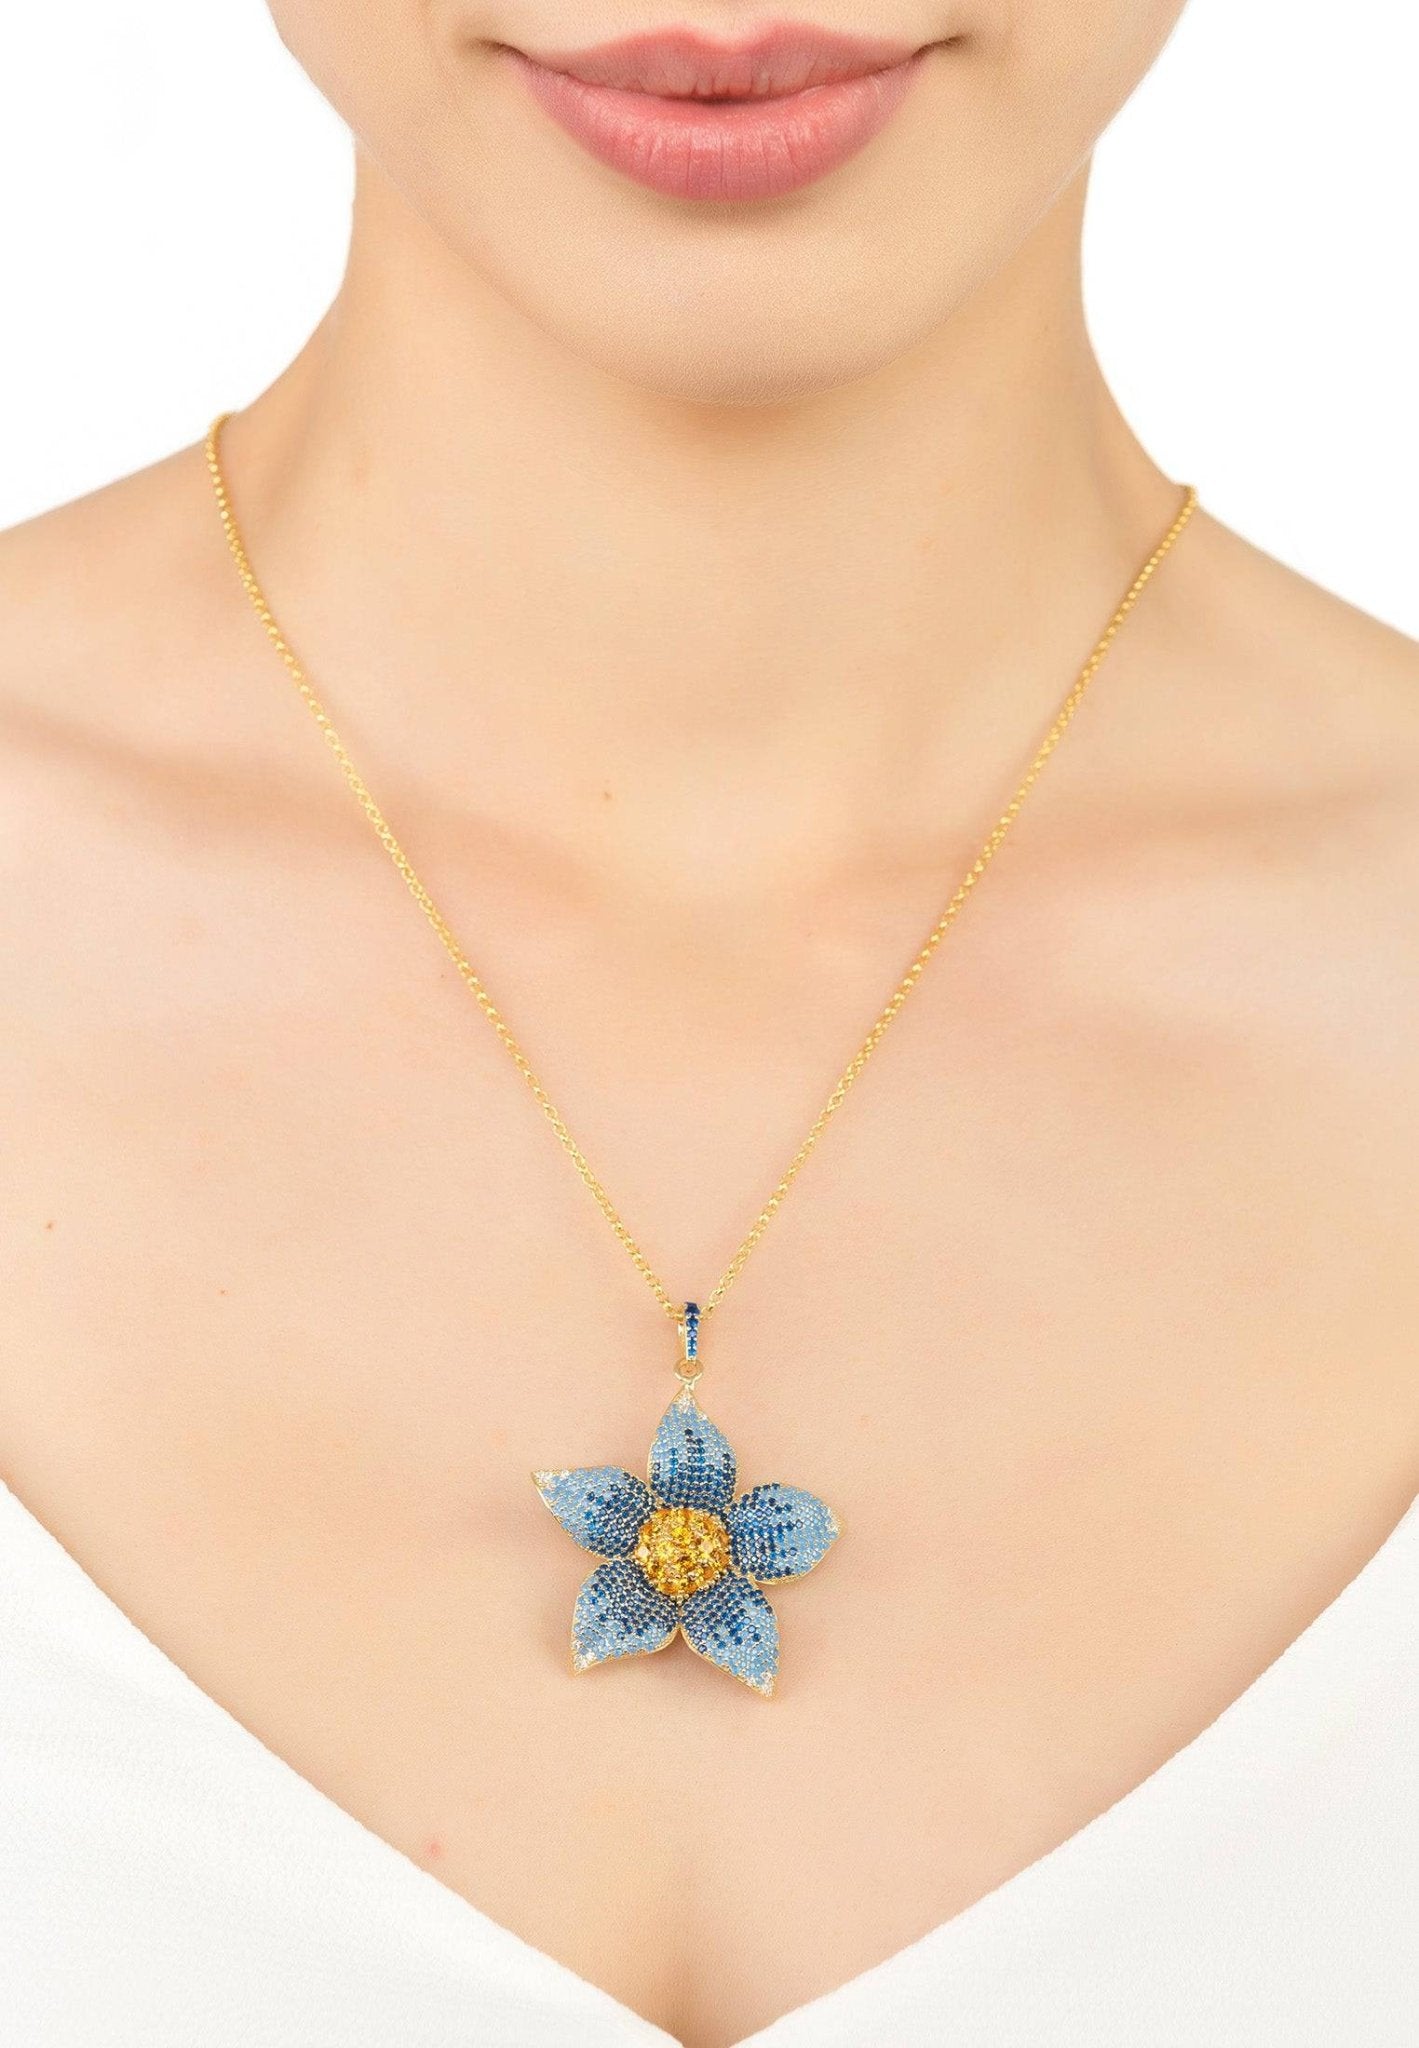 Forget Me Not Flower Necklace Gold - LATELITA Necklaces